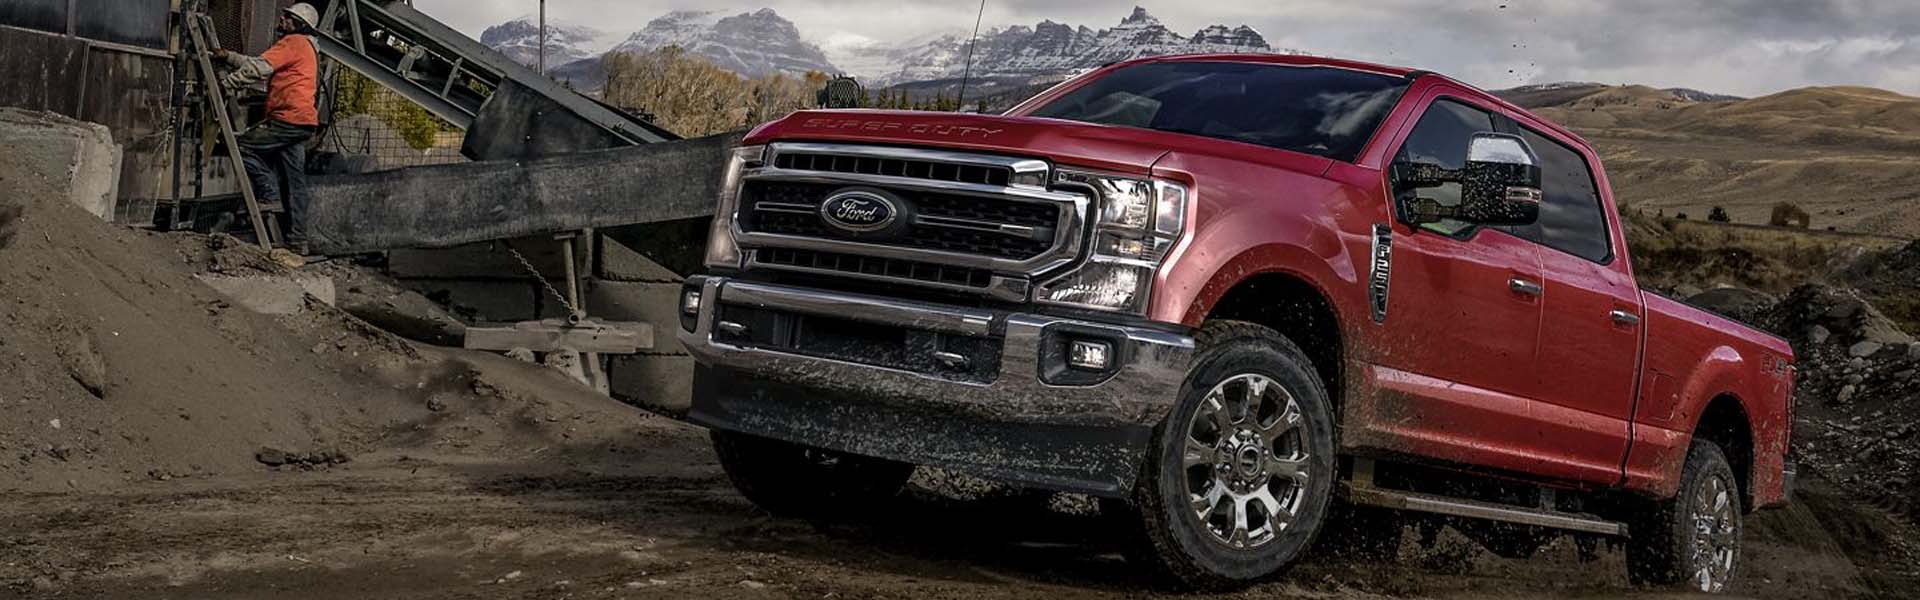 New 2020 Ford Super Duty F 250 Boulevard Ford Of Georgetown